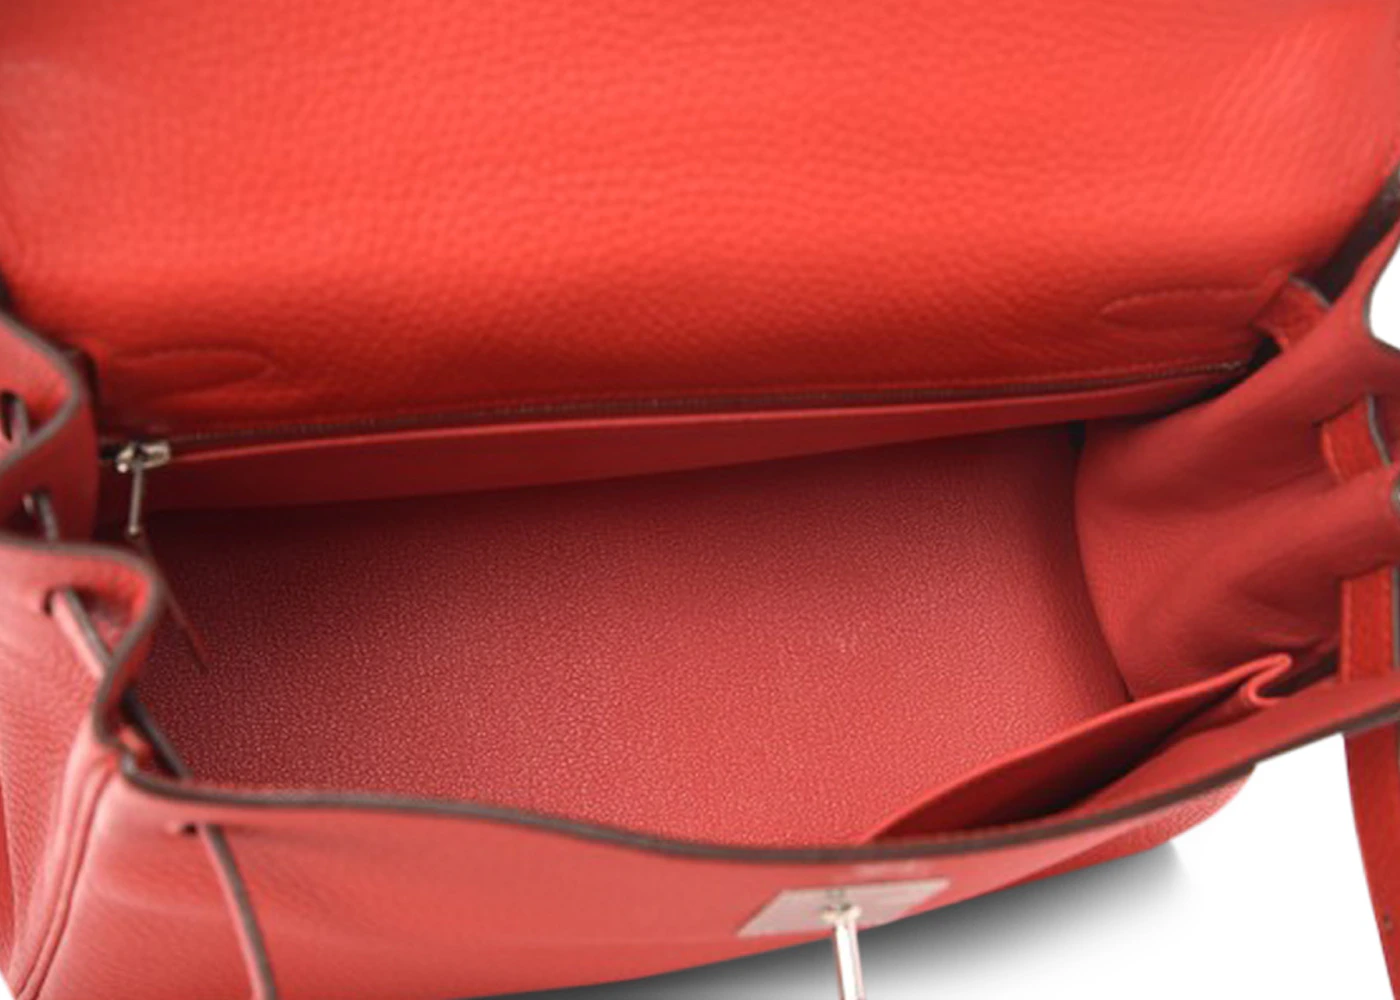 Hermes Kelly Retourne Clemence 28 Rouge Tomate in Taurillon Leather ...